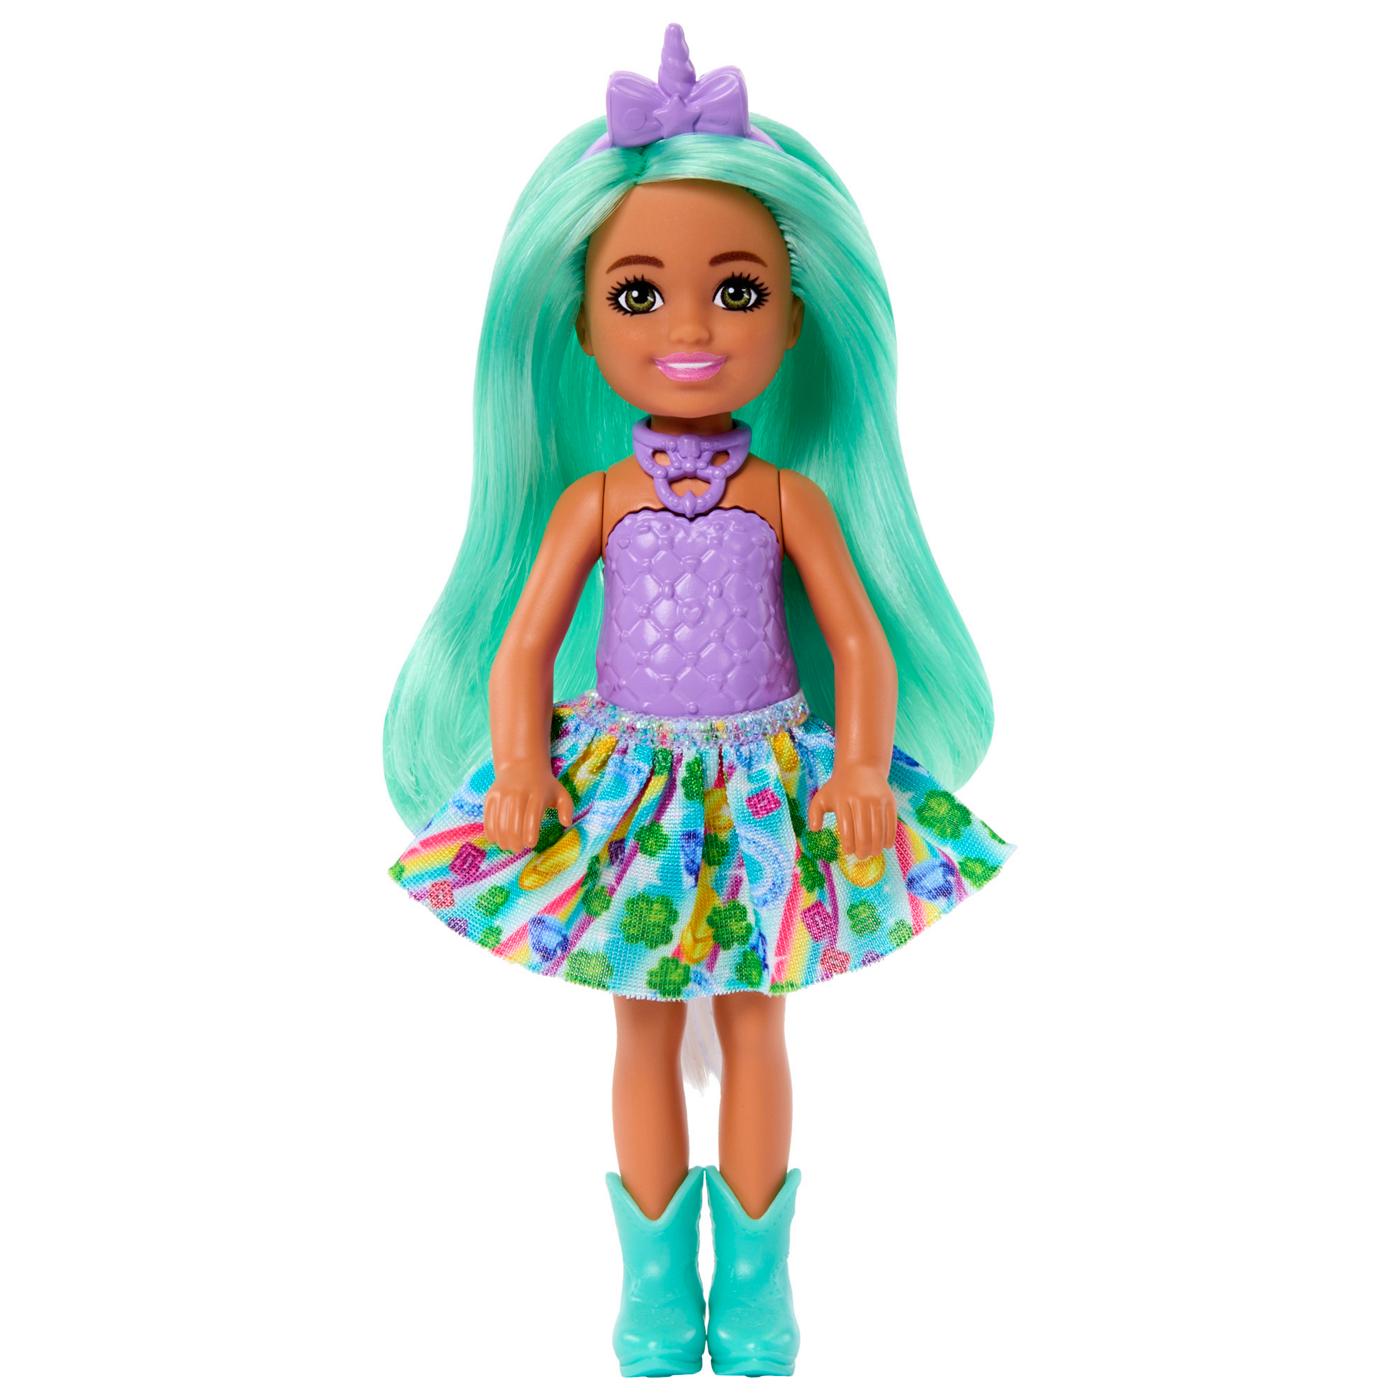 Barbie Unicorn Chelsea Doll with Green Hair; image 2 of 2